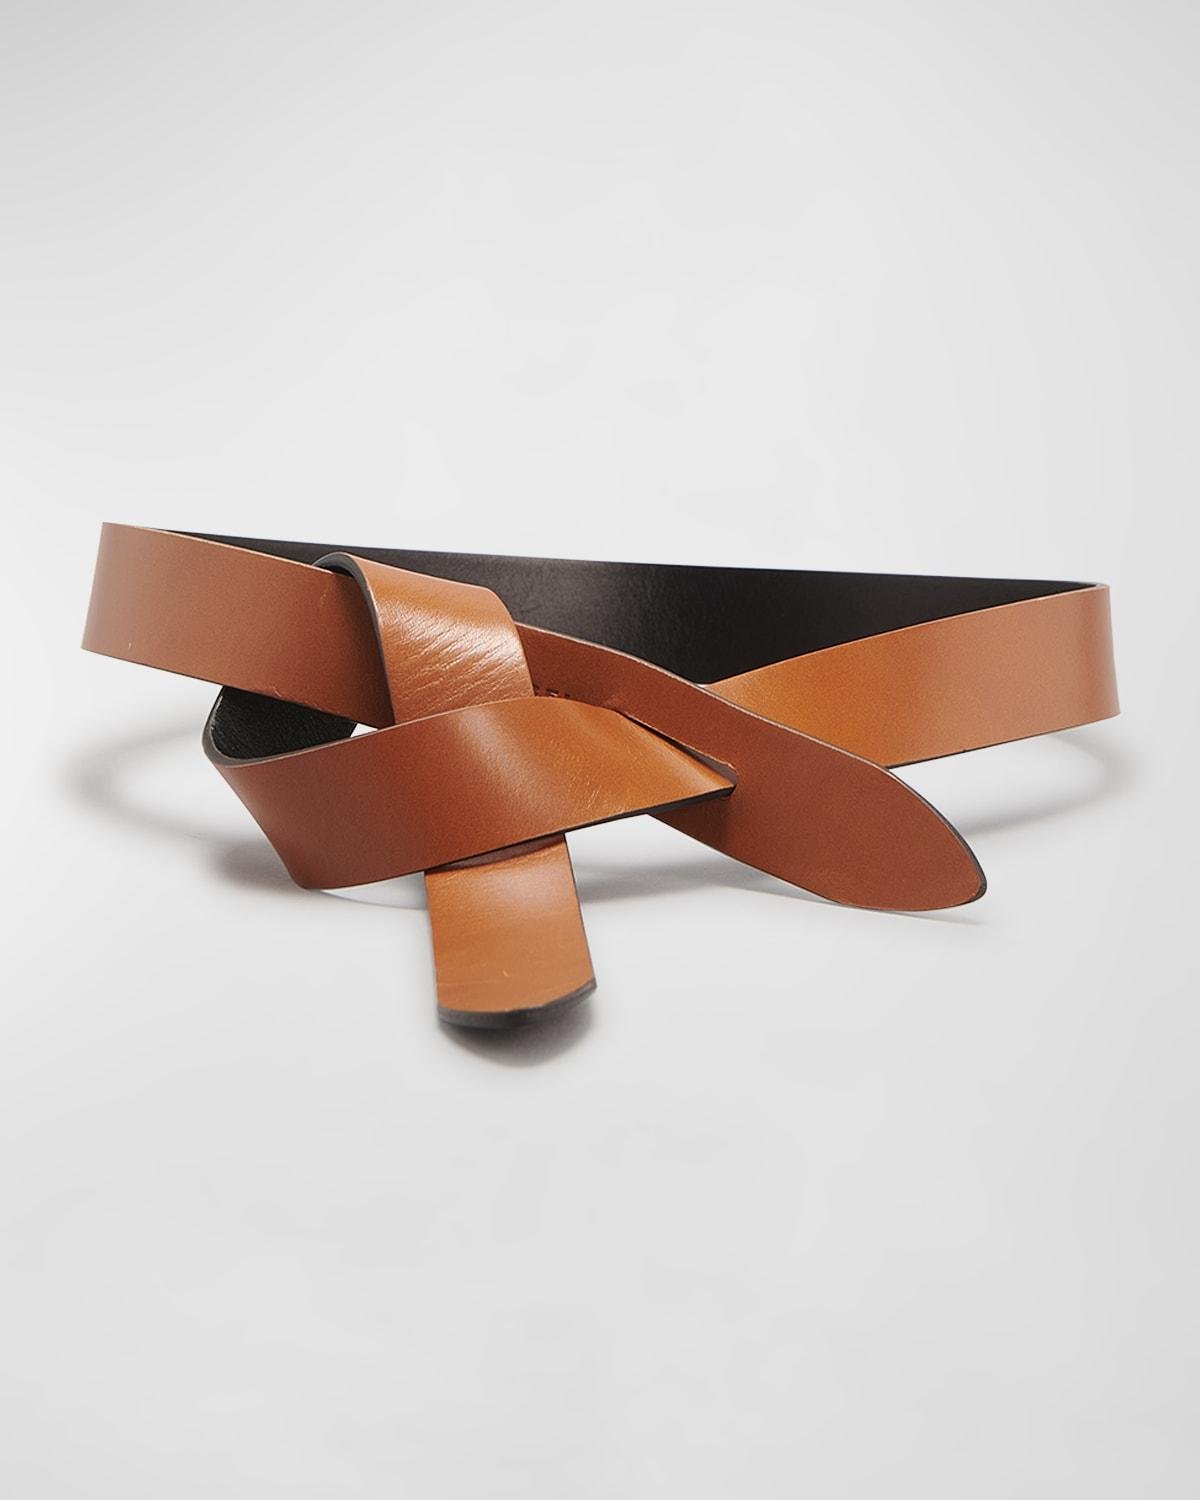 LECCE Bicolor Leather Pull-Through Belt by ISABEL MARANT | jellibeans